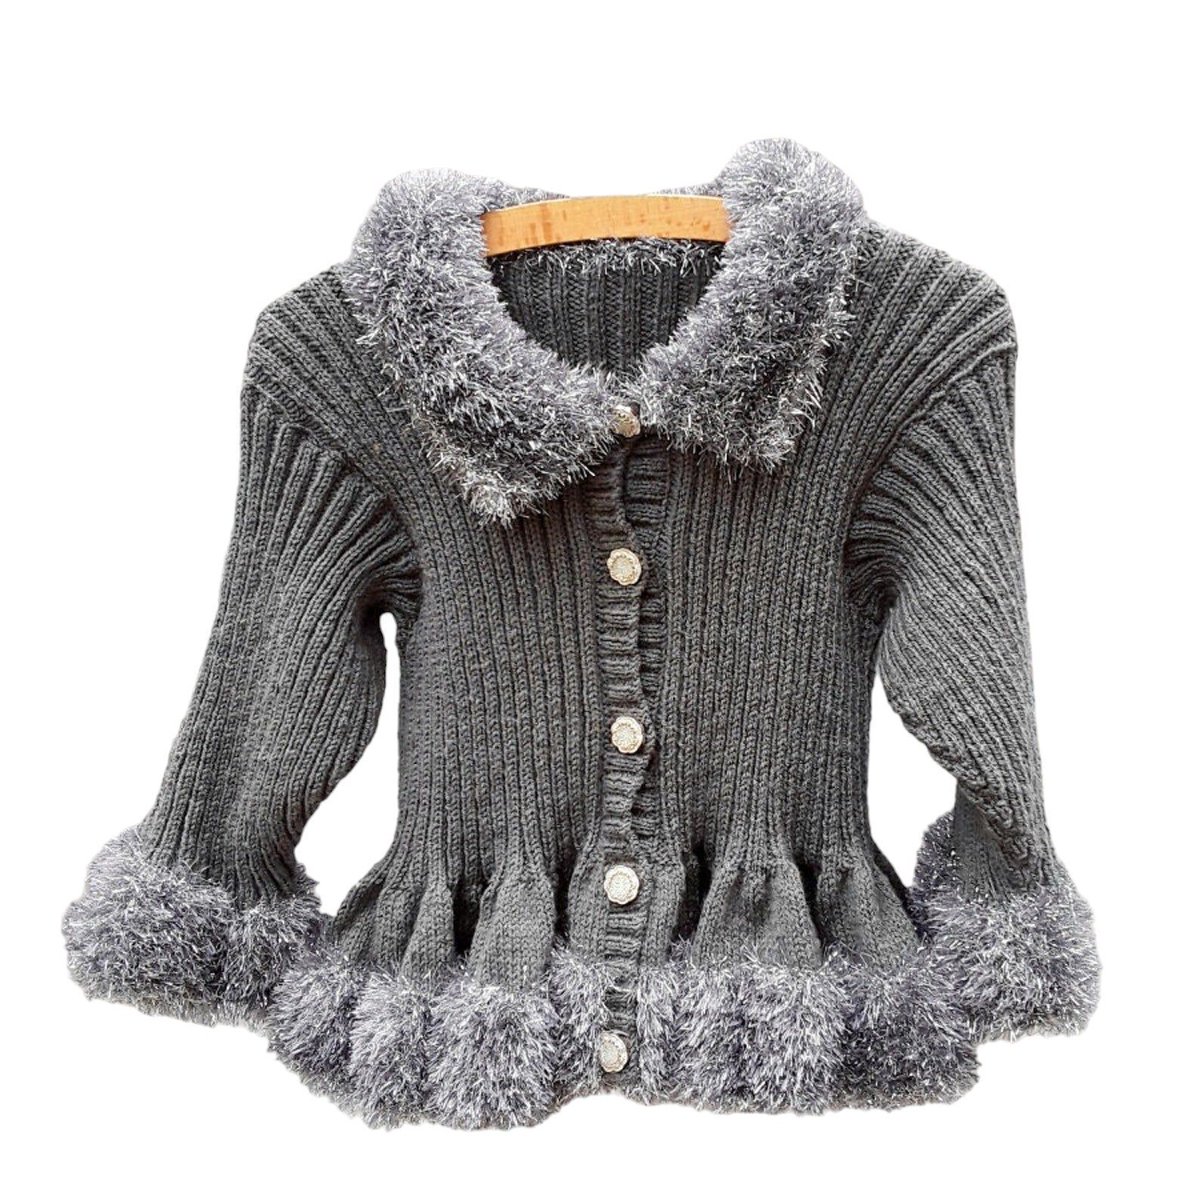 #MHHSBD 

𝗚𝗶𝗿𝗹𝘀 𝗹𝘂𝘅𝘂𝗿𝘆 𝗸𝗻𝗶𝘁𝘄𝗲𝗮𝗿 

Check out this adorable hand knitted girls cardigan! The sparkly tinsel yarn trim adds a touch of glamour. Perfect for little fashionistas. Get yours now on Etsy.  

knittingtopia.etsy.com/listing/168055…